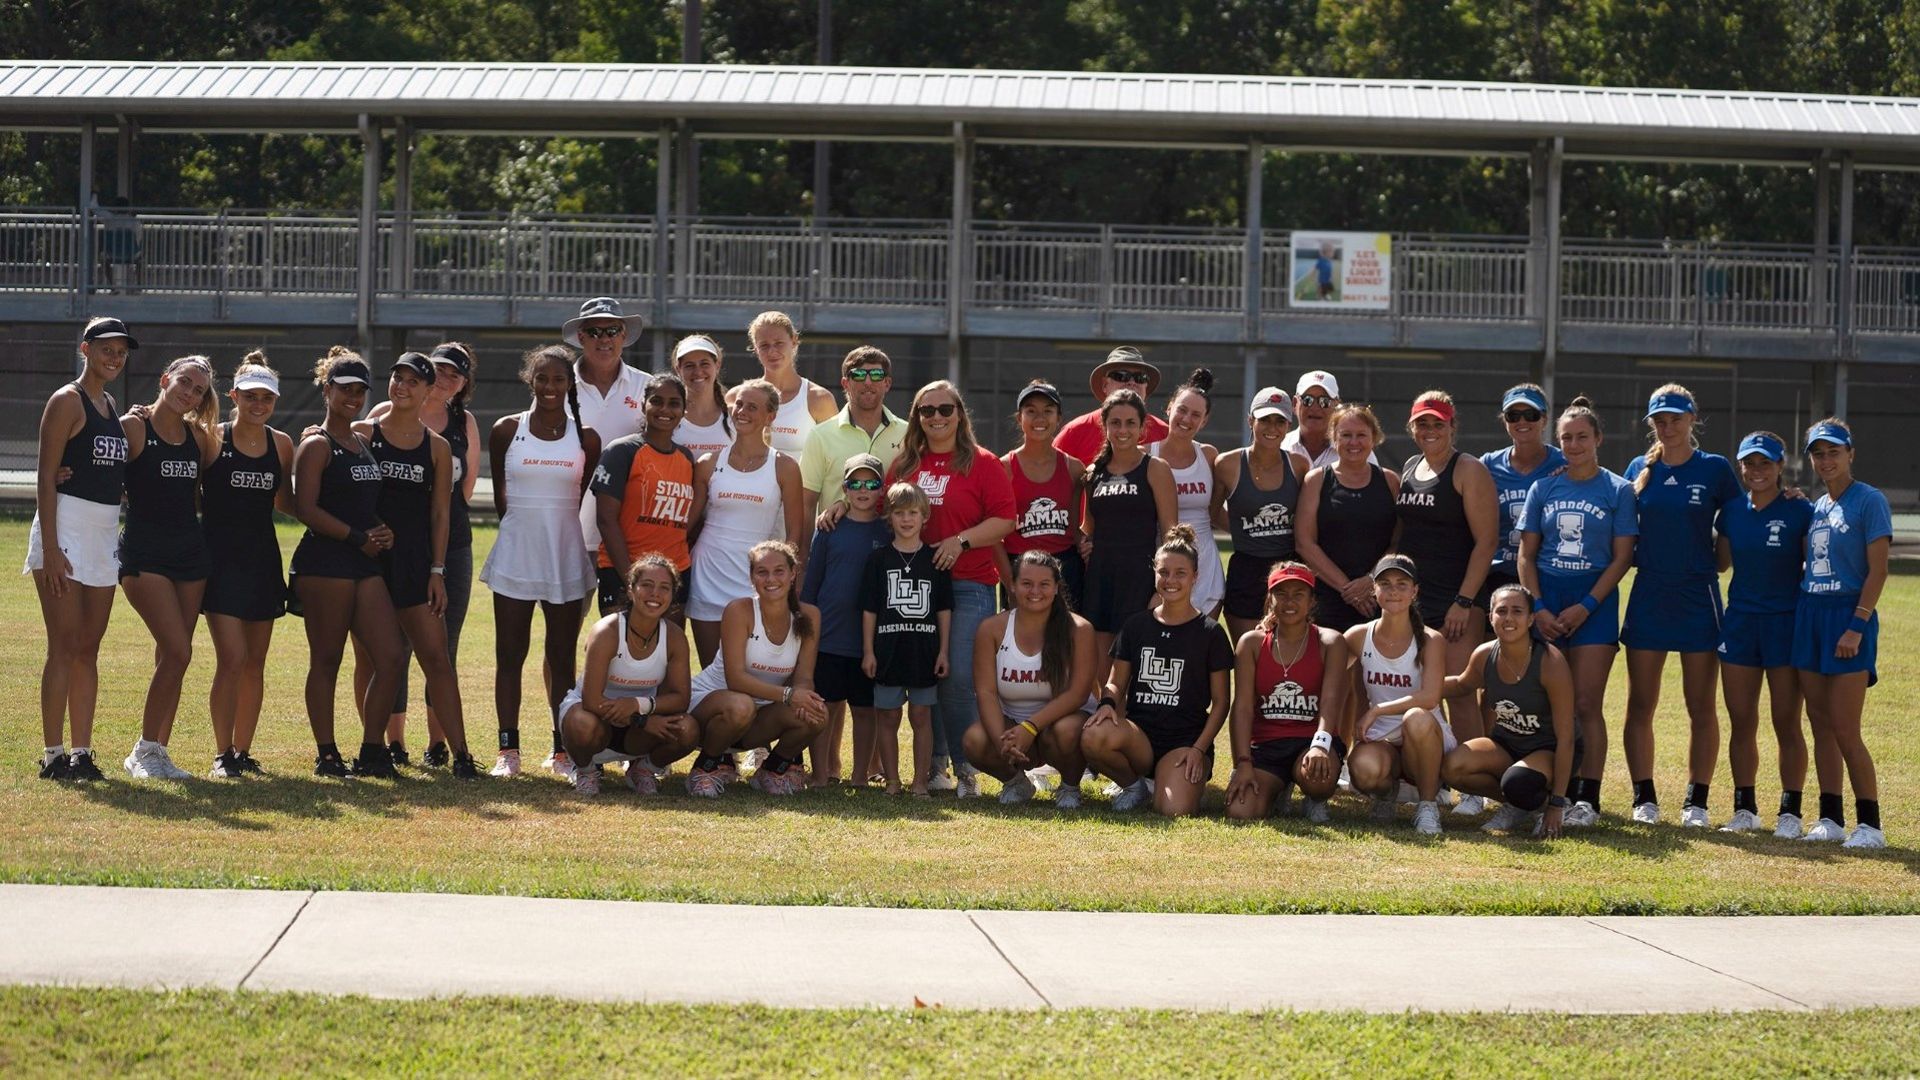 Stephen F. Austin, Sam Houston, Lamar, and Texas A&M-Corpus Christi tennis teams gather for a picture following the tournament. Image credit: LU athletics.